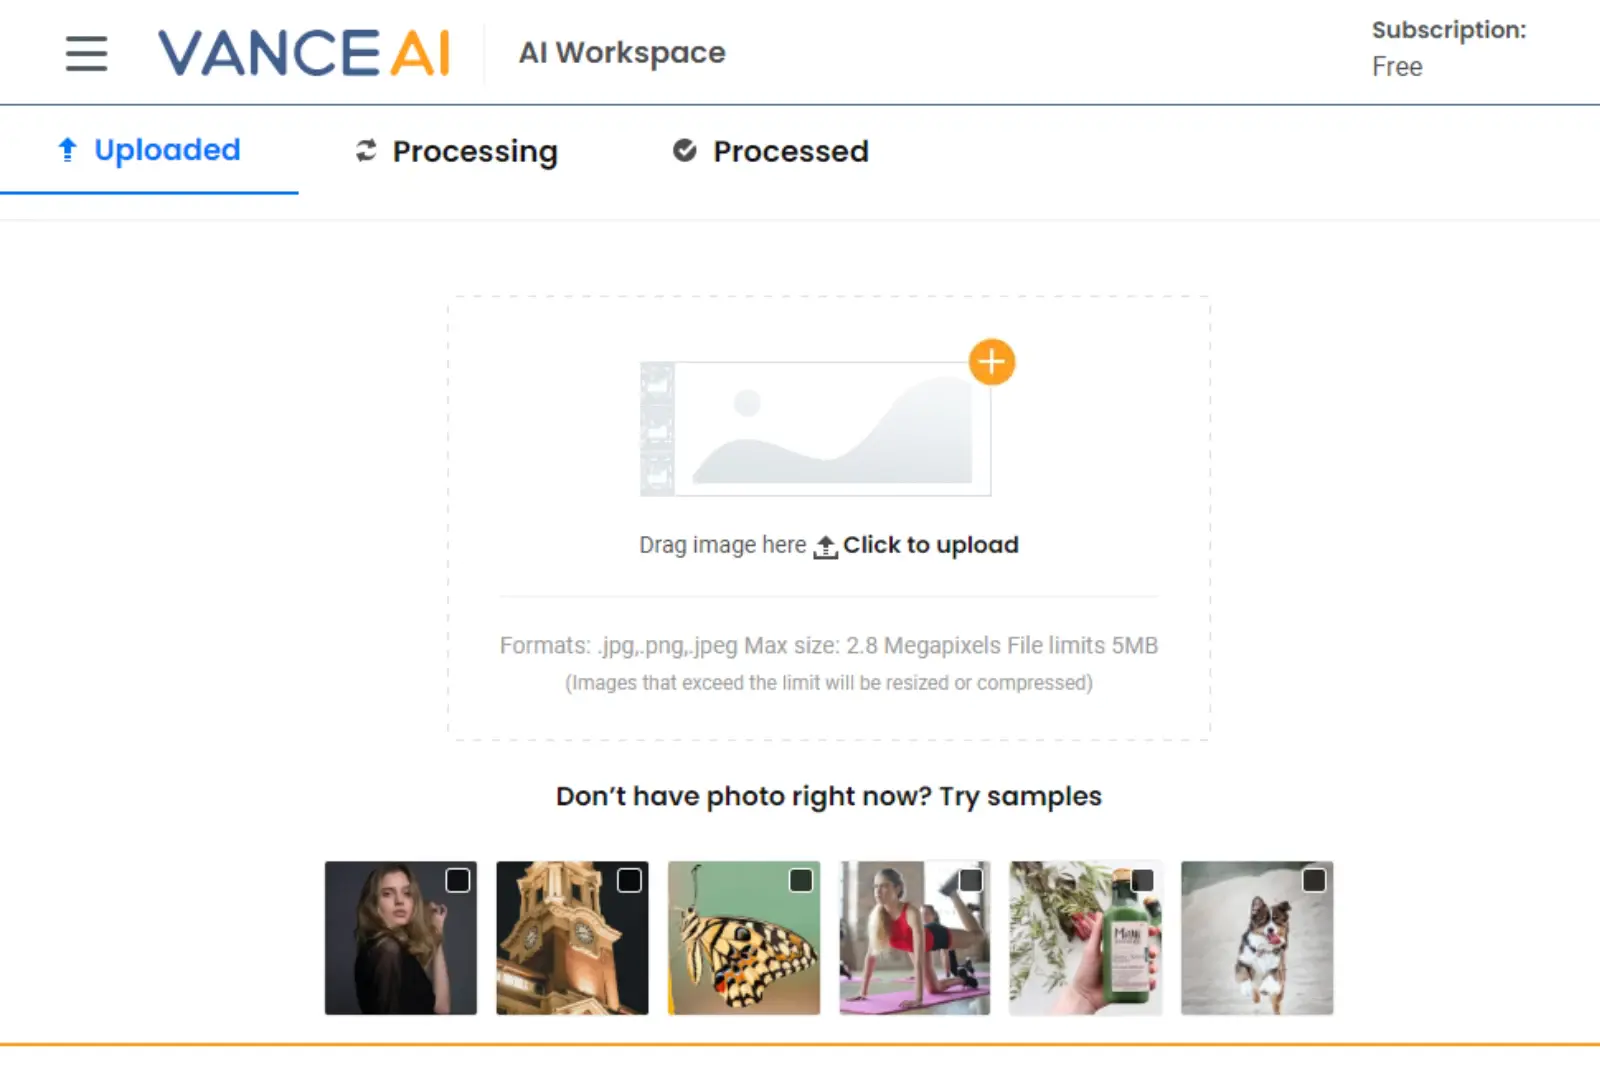 Home Page of Vance AI Image Enlarger